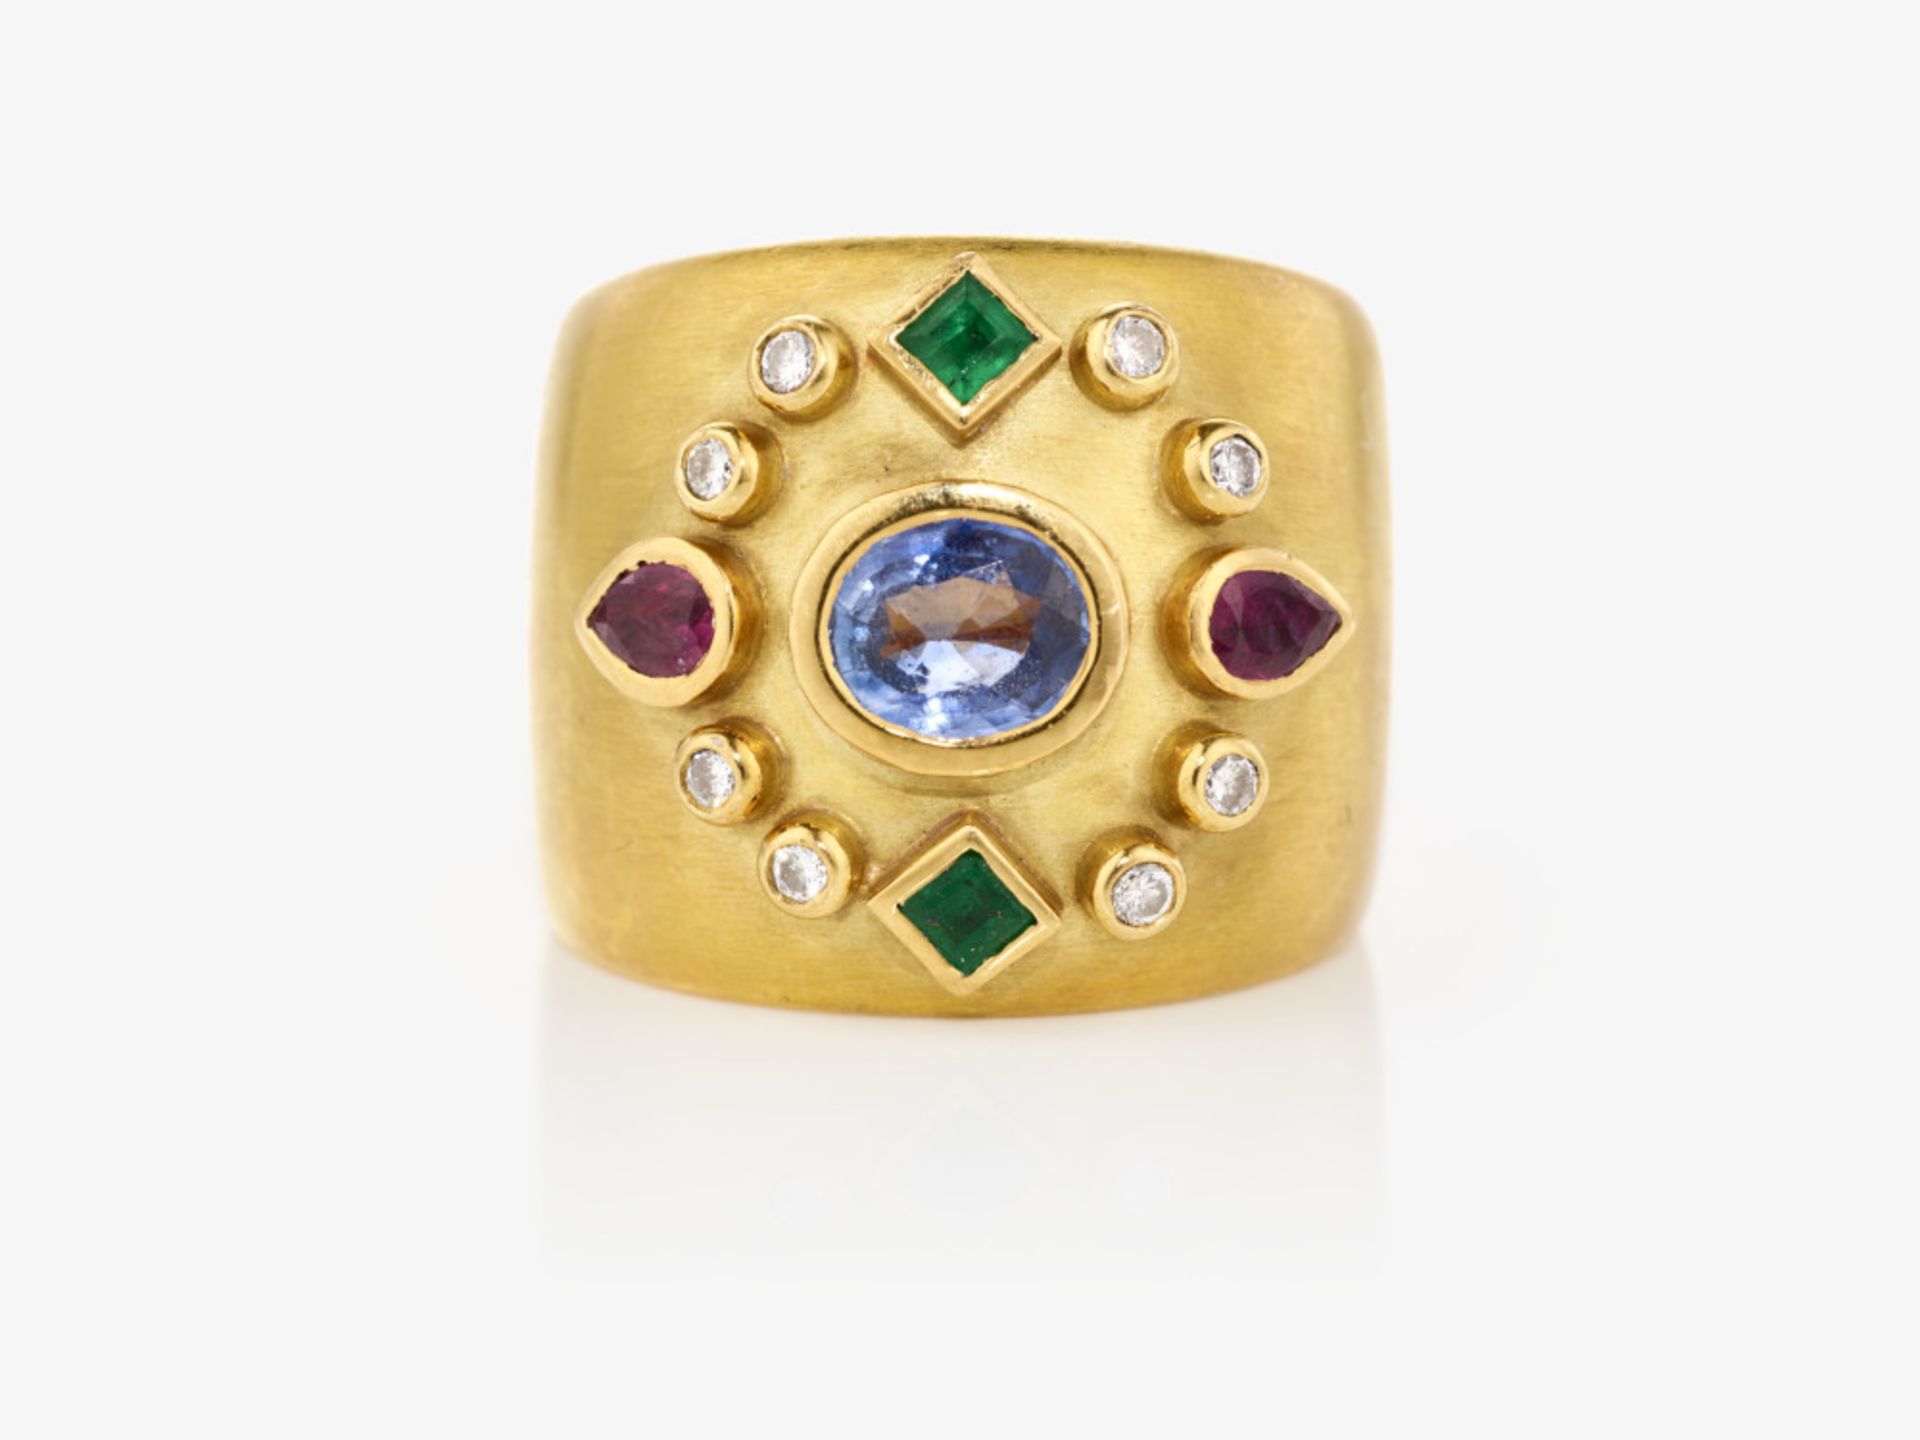 A ring with sapphire, rubies, emeralds and brilliant cut diamonds - Image 4 of 4